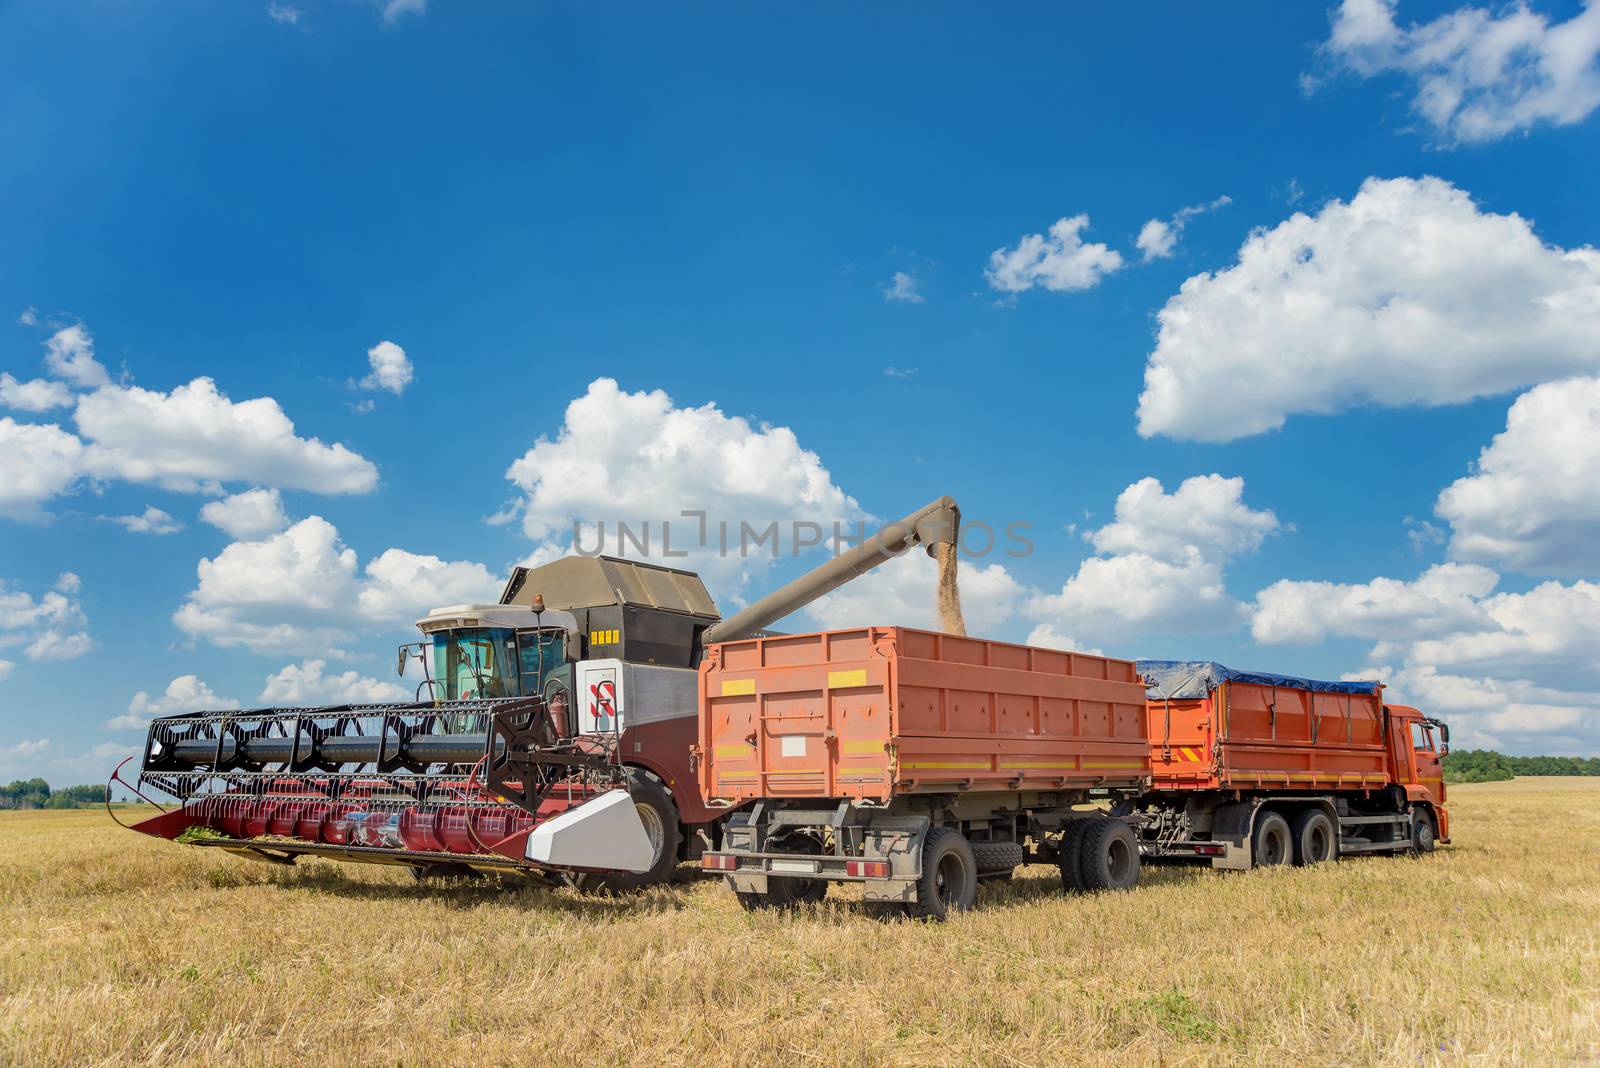 Loading threshed grain from the combine into a transport truck in the middle of wheat field under a blue sky with beautiful white clouds